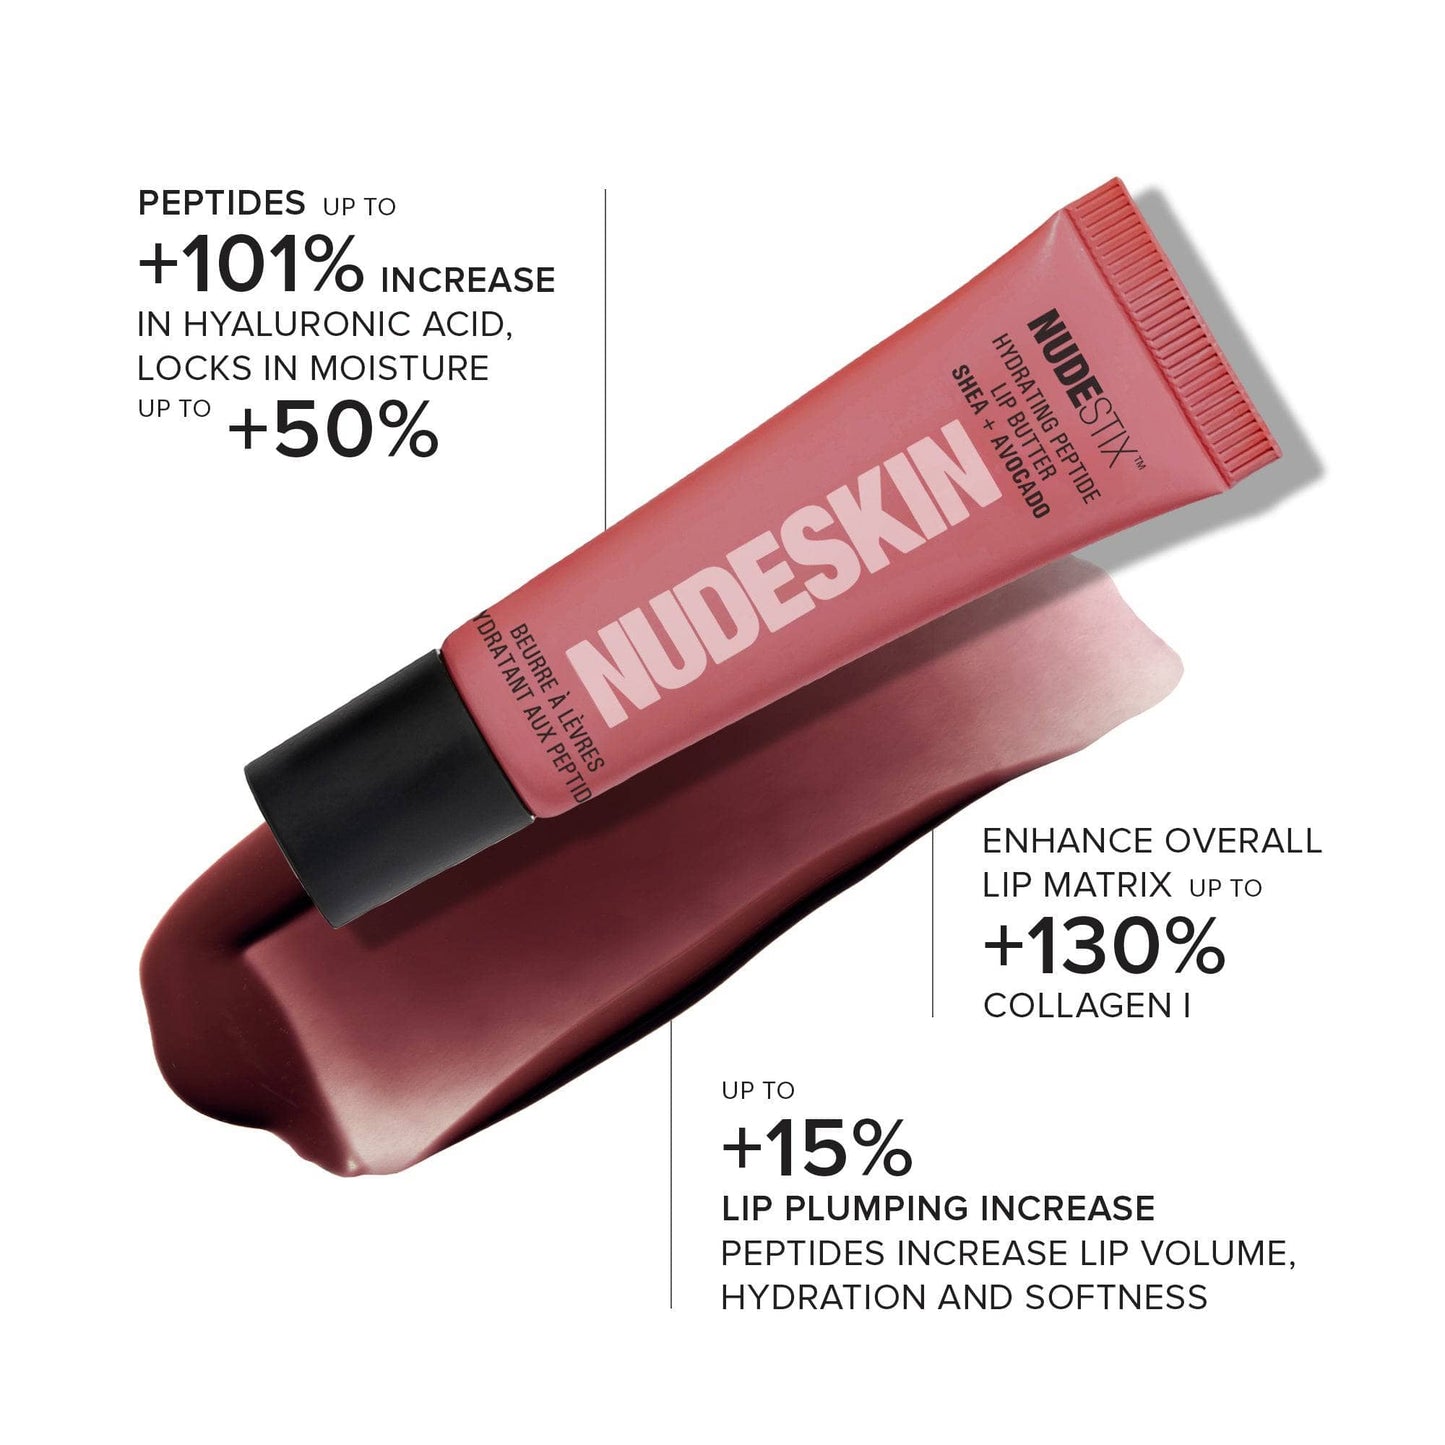 nudeskin hydrating lip butter benefits and application usage